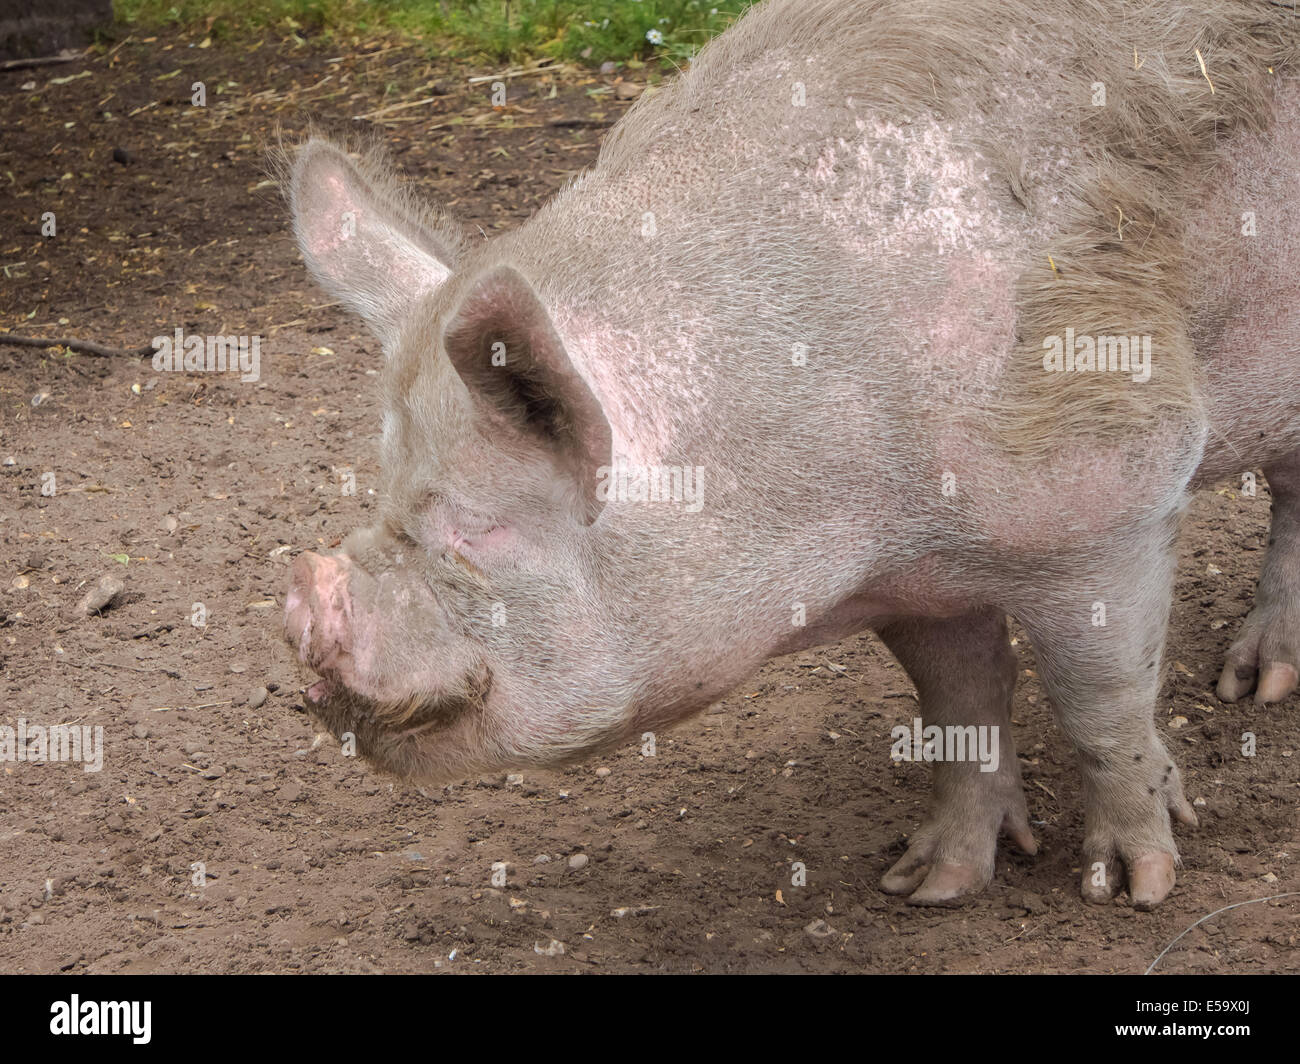 A Kune Kune pig digging for treats in the mud Stock Photo